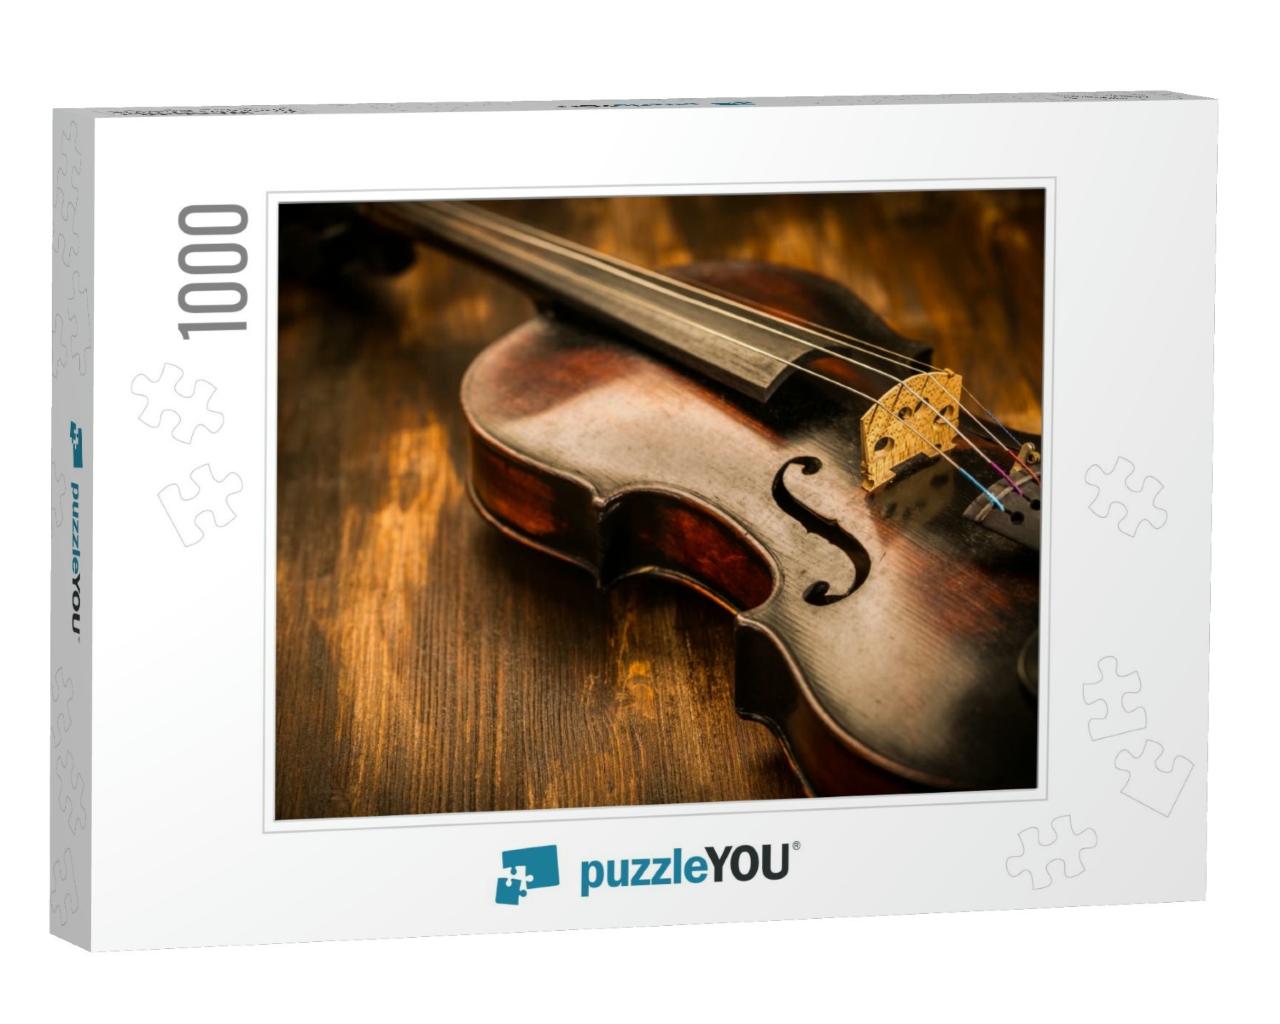 Violin in Vintage Style on Wood Background... Jigsaw Puzzle with 1000 pieces